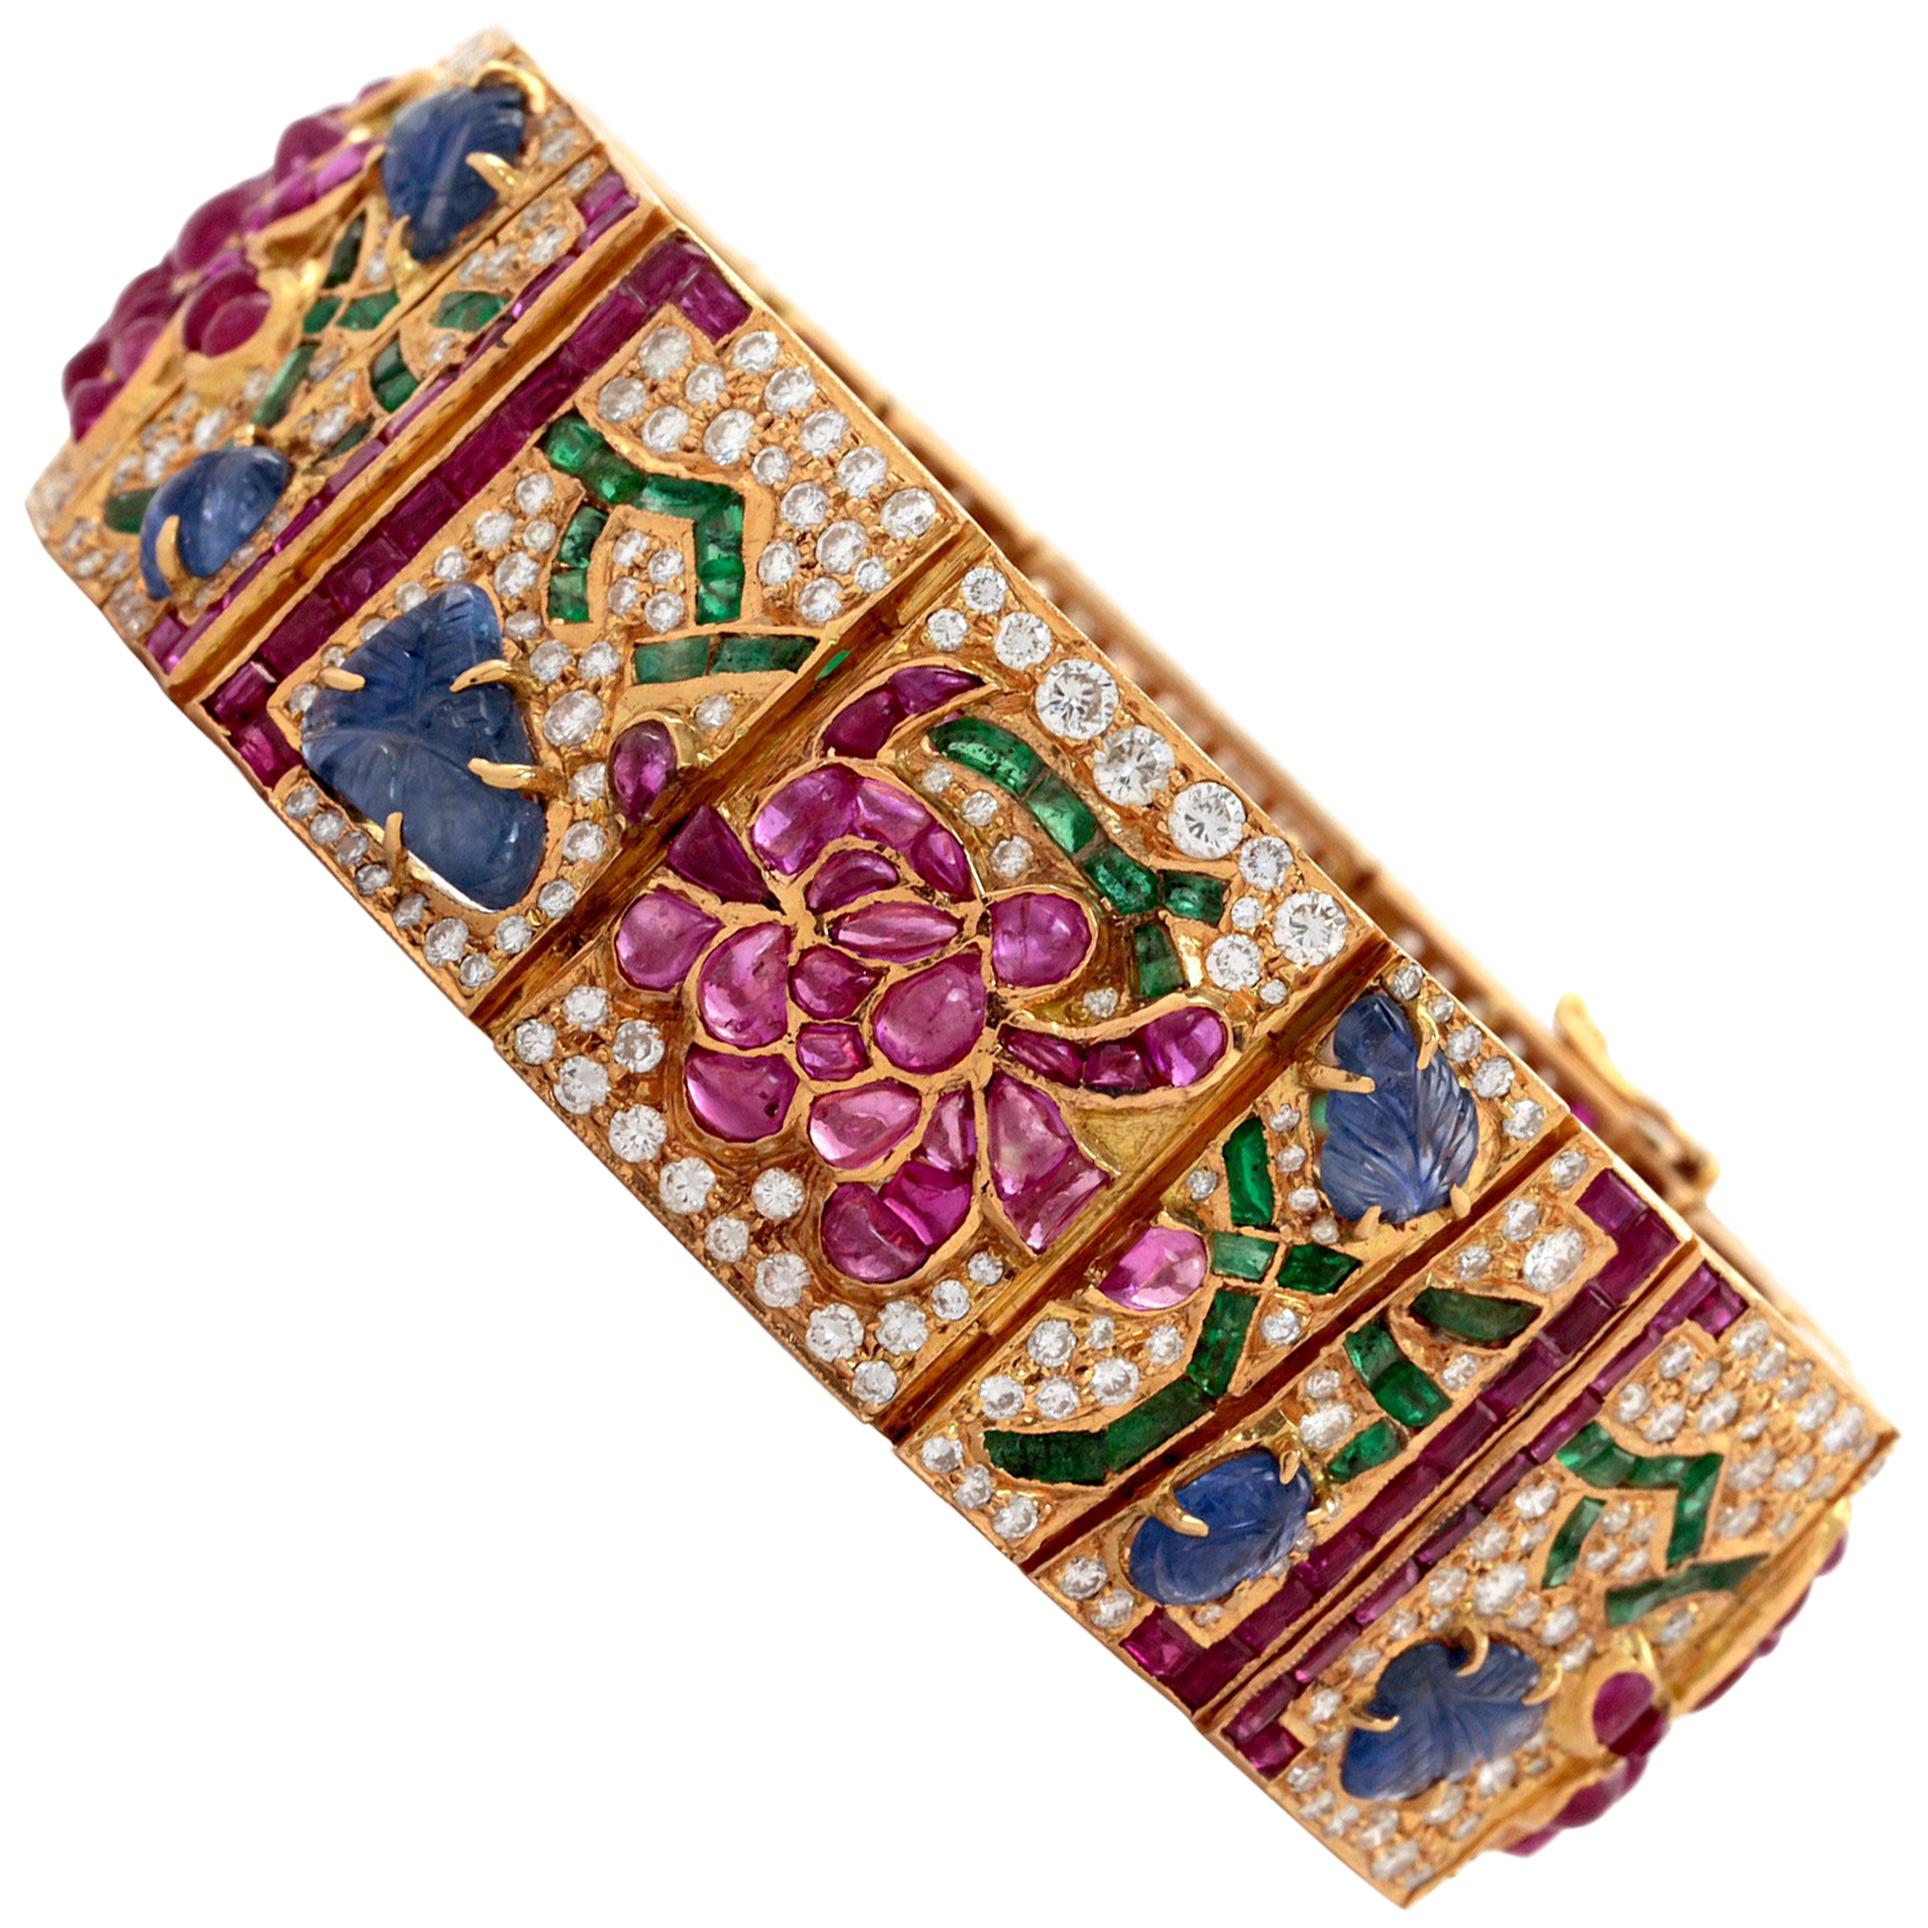 Mutli Gem Yellow Gold Bracelet with Diamonds, and Sapphires in a Flower design. For Sale